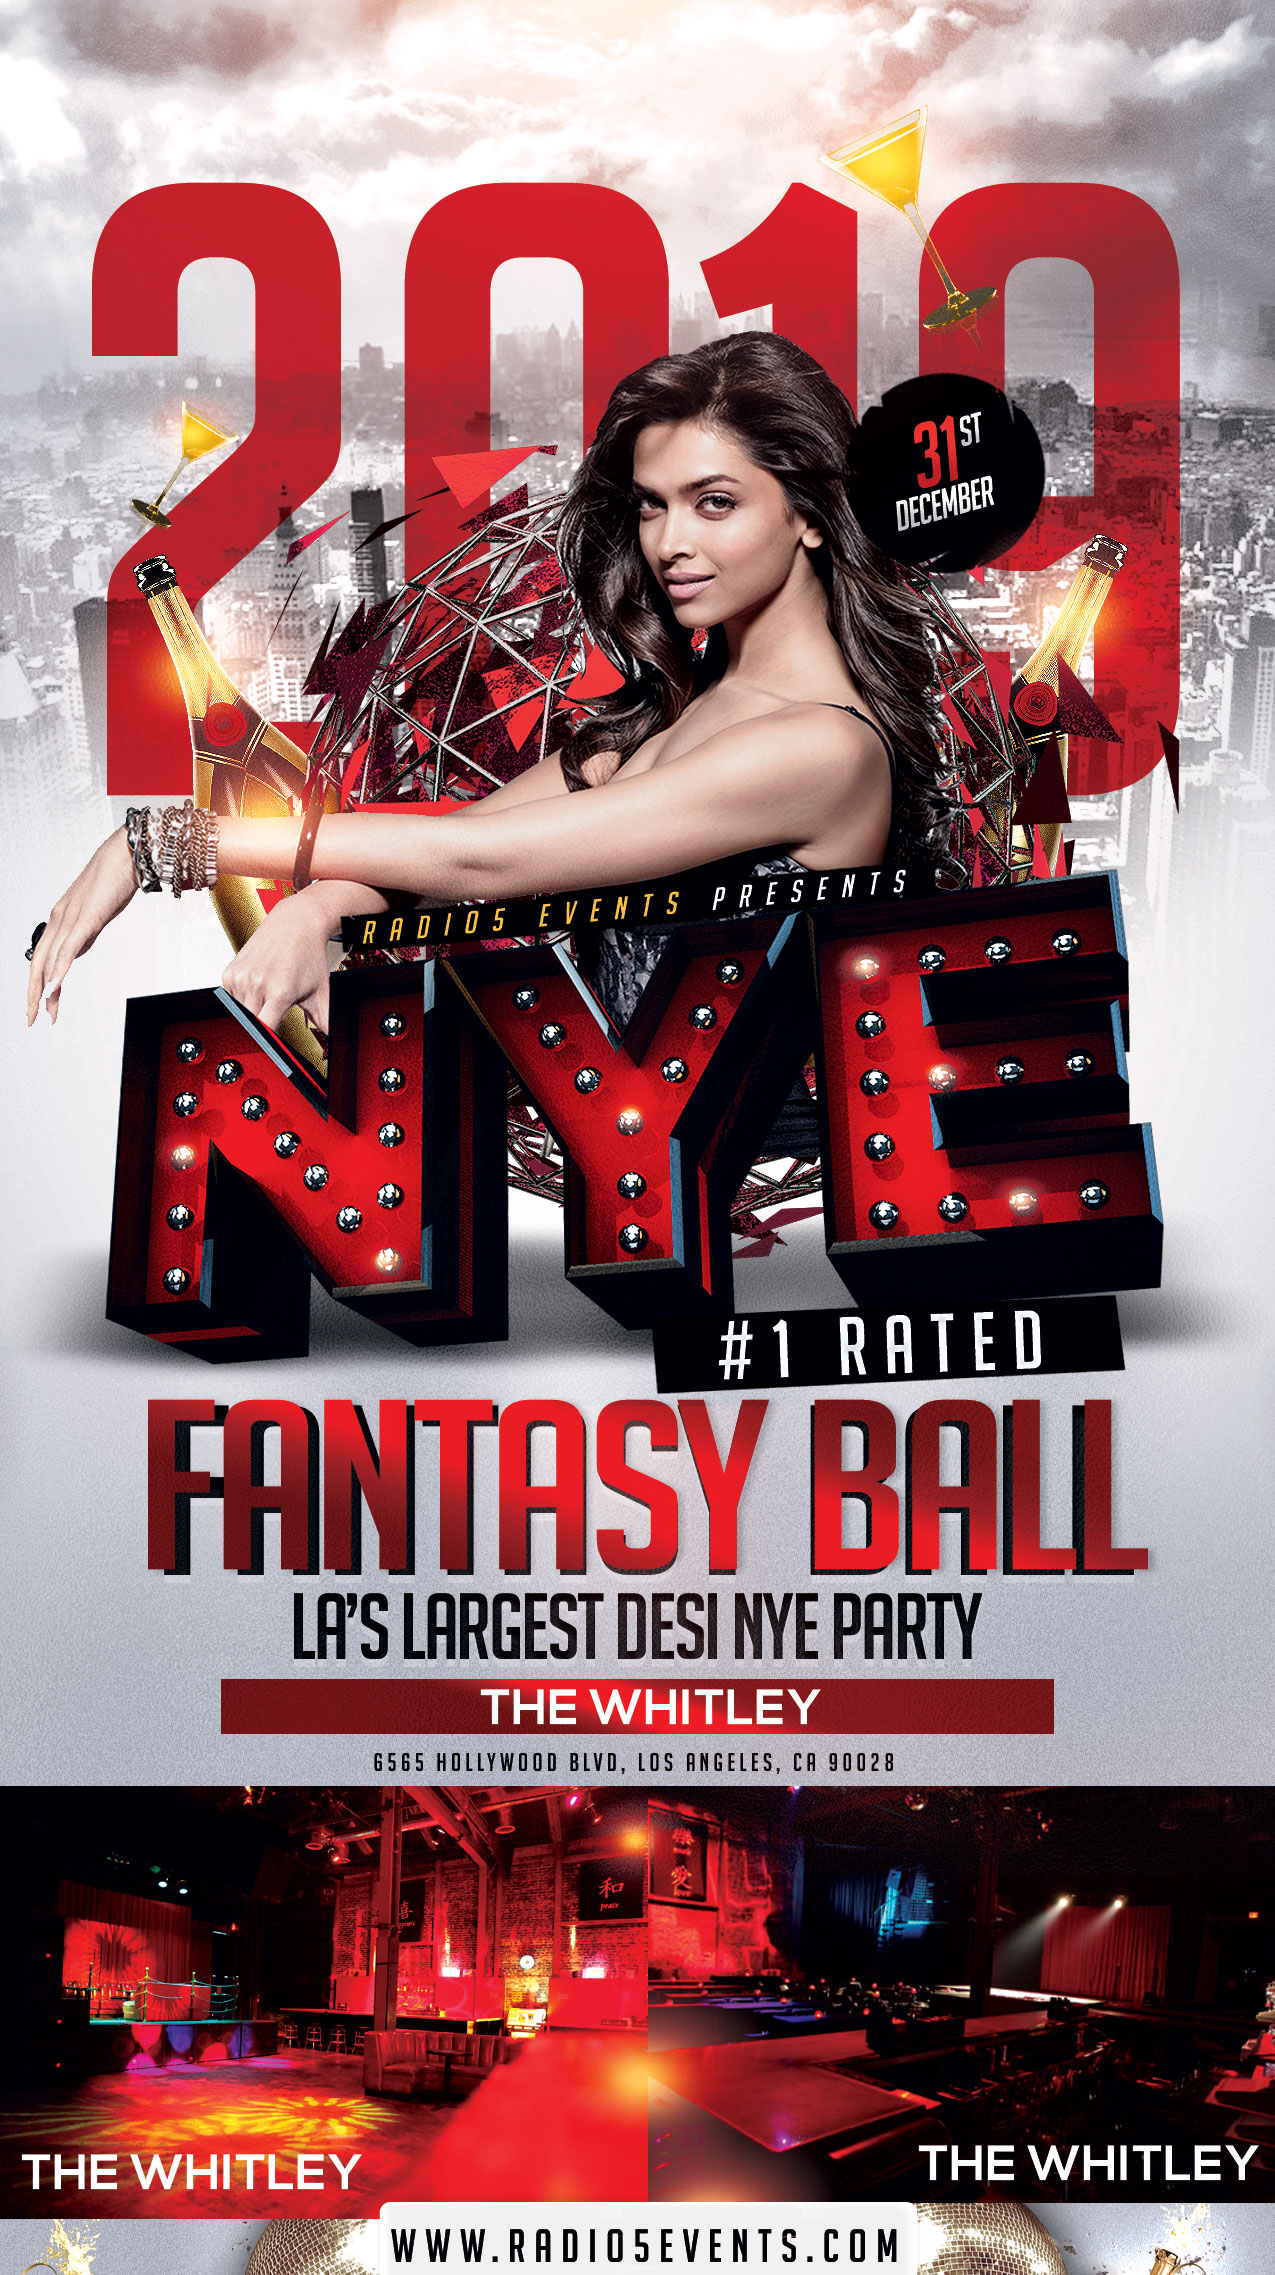 Radio5 Events presents the #1 Rated Desi NYE Party in LA! New Years Eve 2019 @ The Whitley w/ Mumbai's DJ DANDA! 13th Annual Fantasy Ball. Celebrate New Years with Charm & Sophistication!